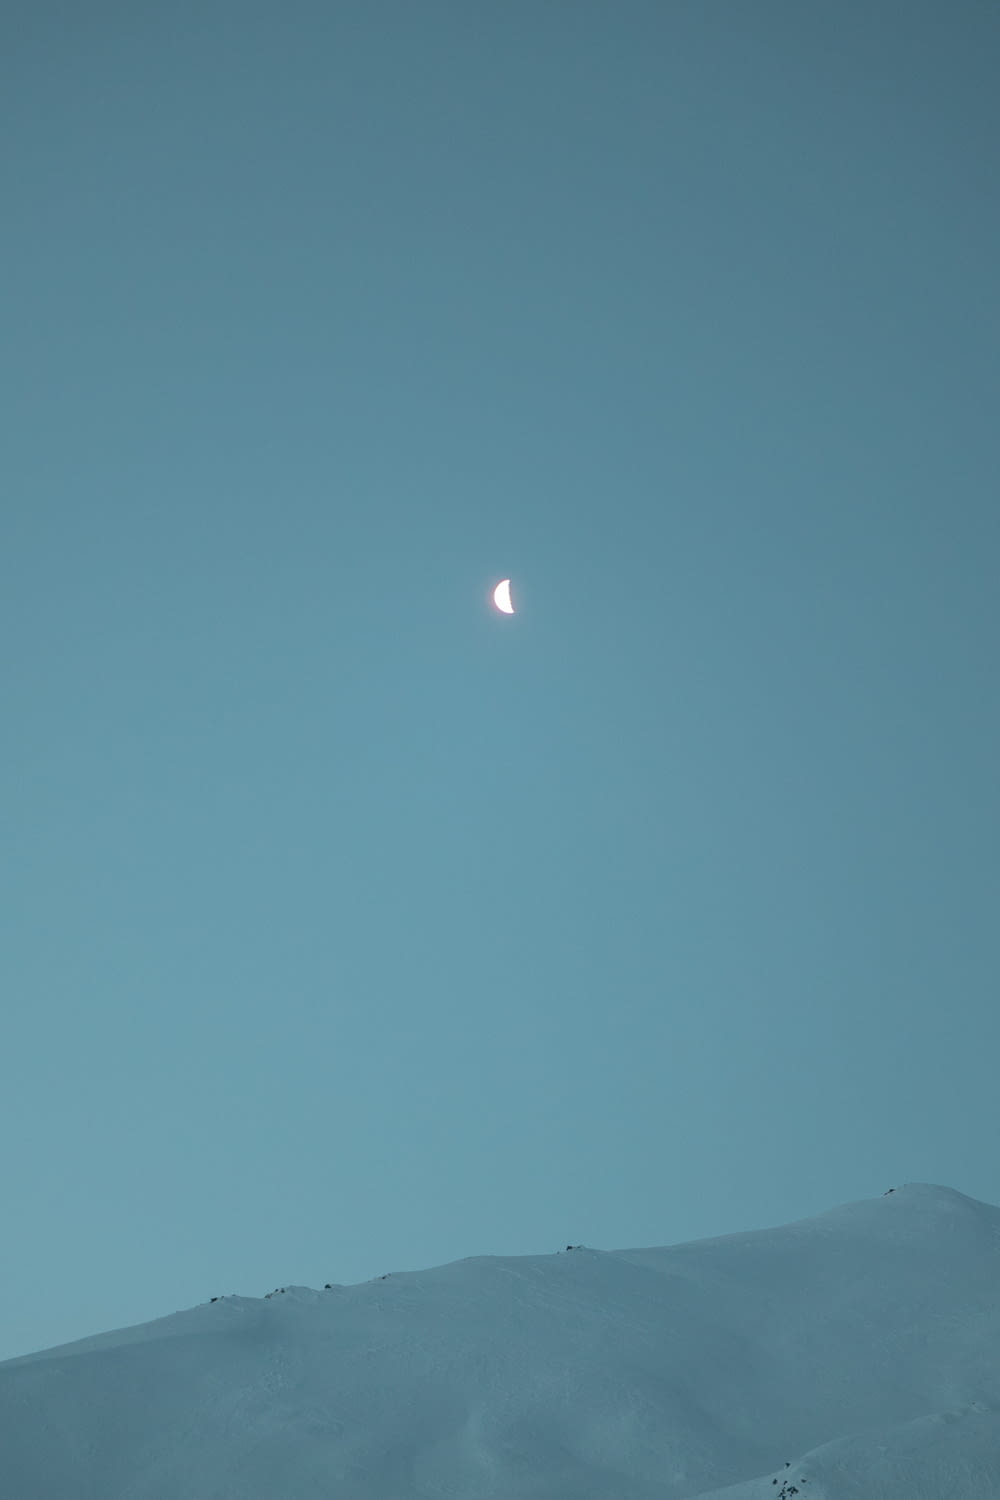 a half moon is seen in the sky above a snowy hill